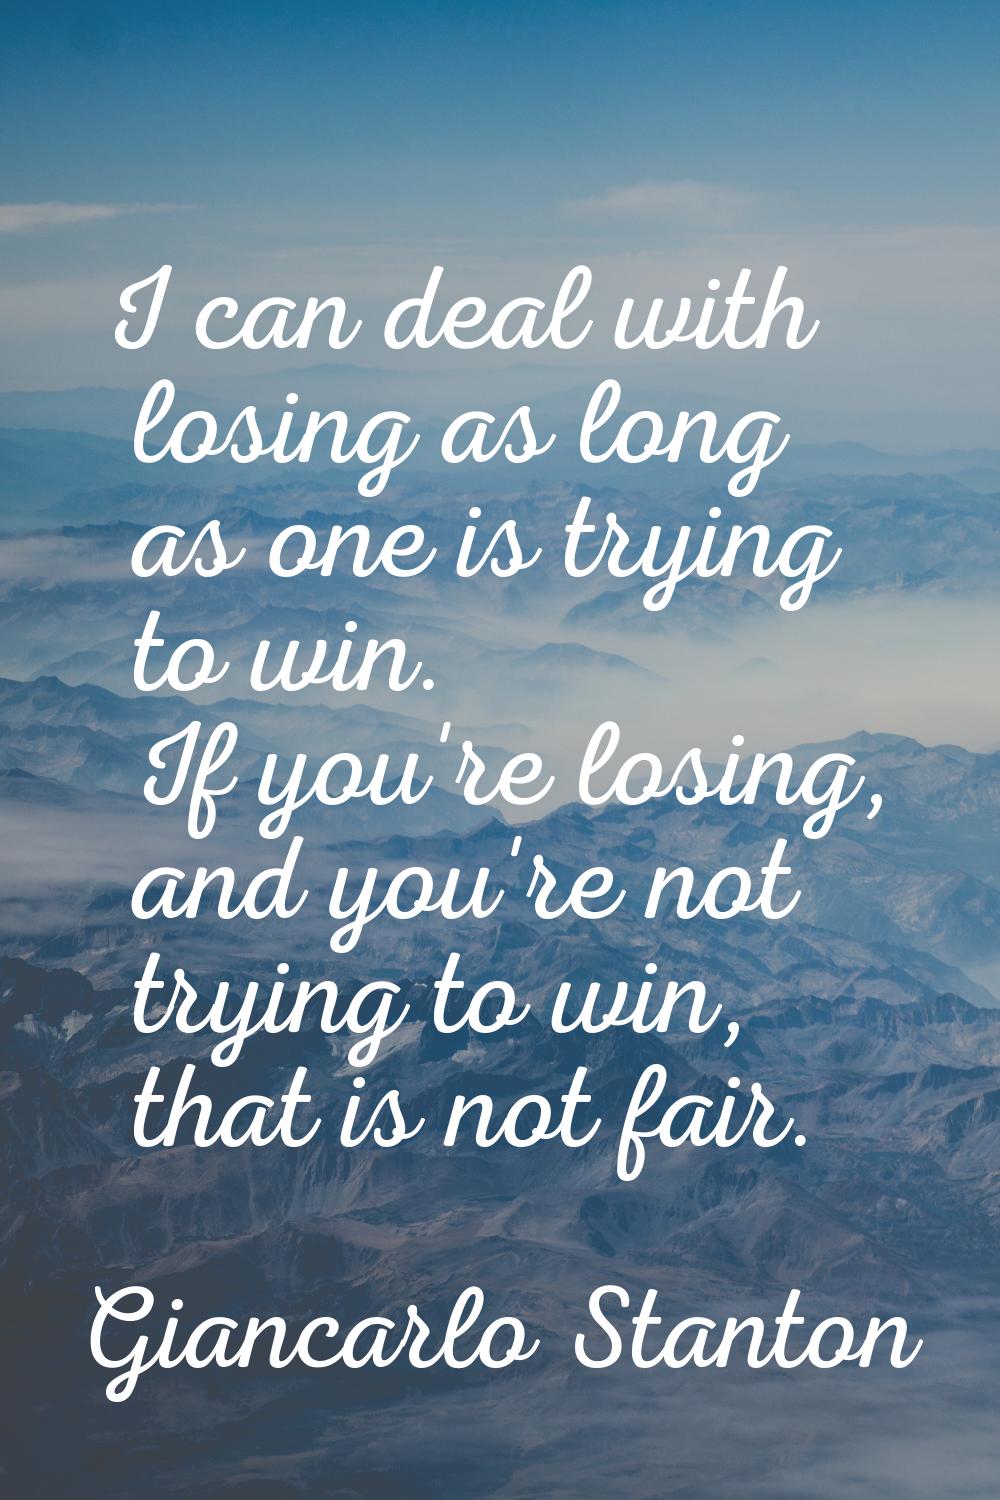 I can deal with losing as long as one is trying to win. If you're losing, and you're not trying to 